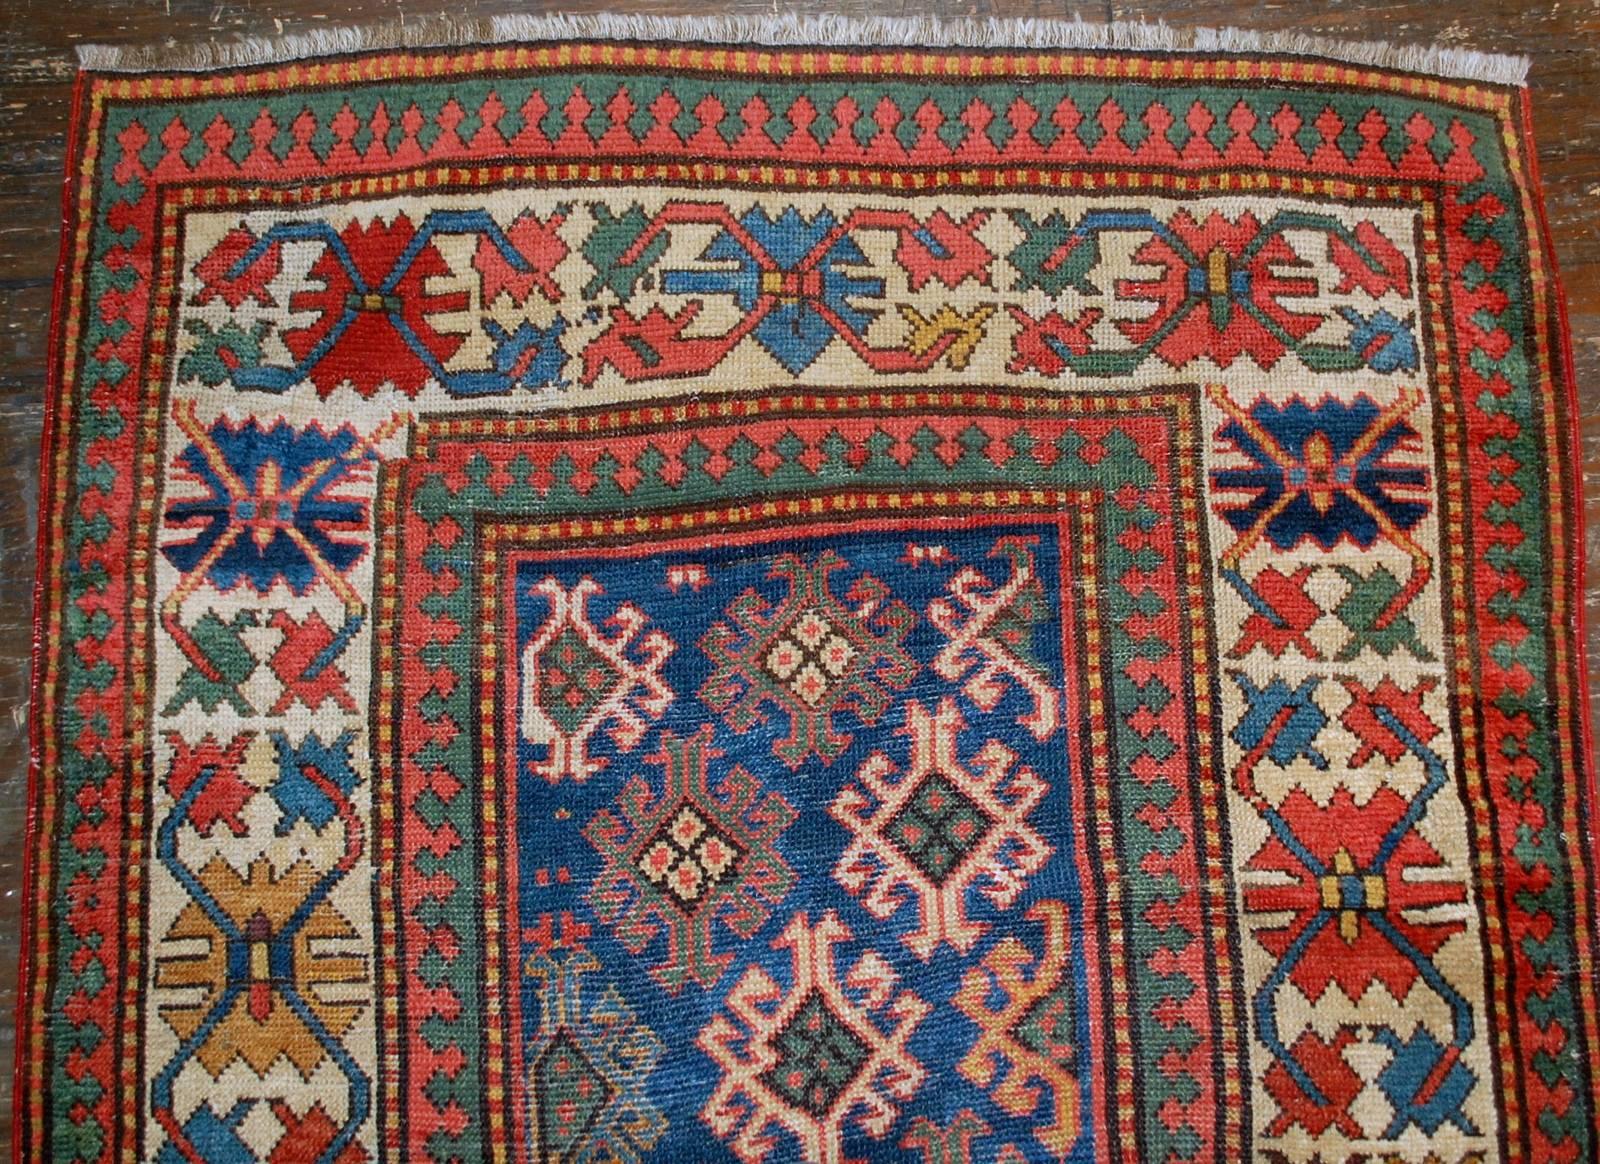 Antique handmade Caucasian Gendje rug in good condition. The rug has dark blue field covered in tribal figures. It is surrounded by the white border with tribal design on it as well. It is has all-over field. The rug has been restored and in good